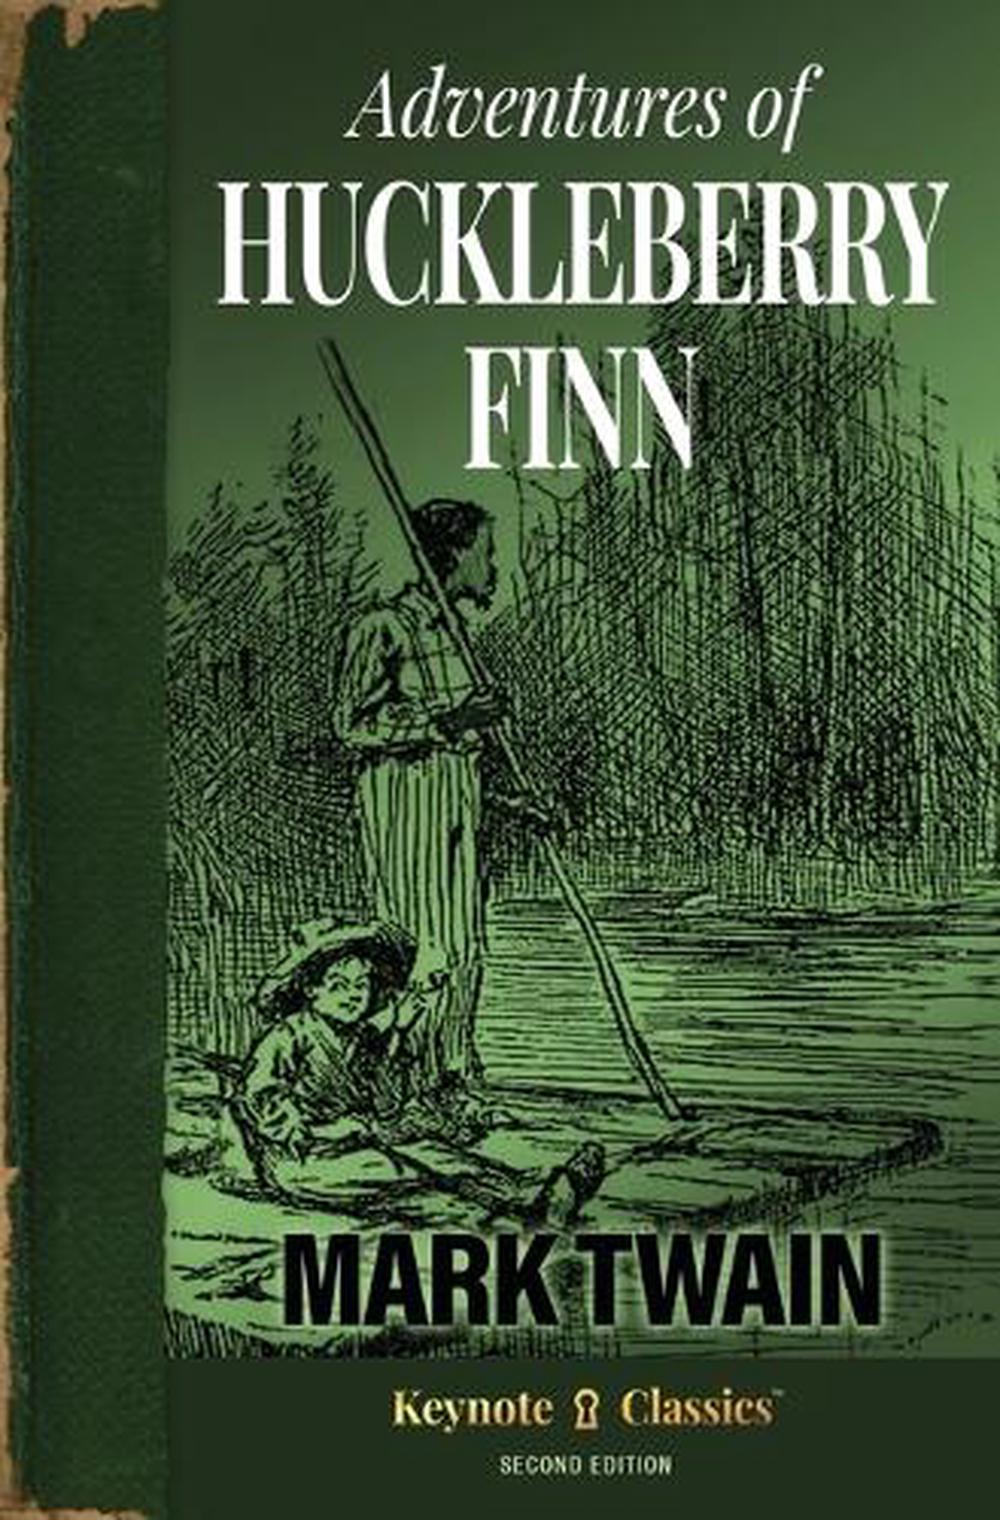 the adventures of huckleberry finn publisher